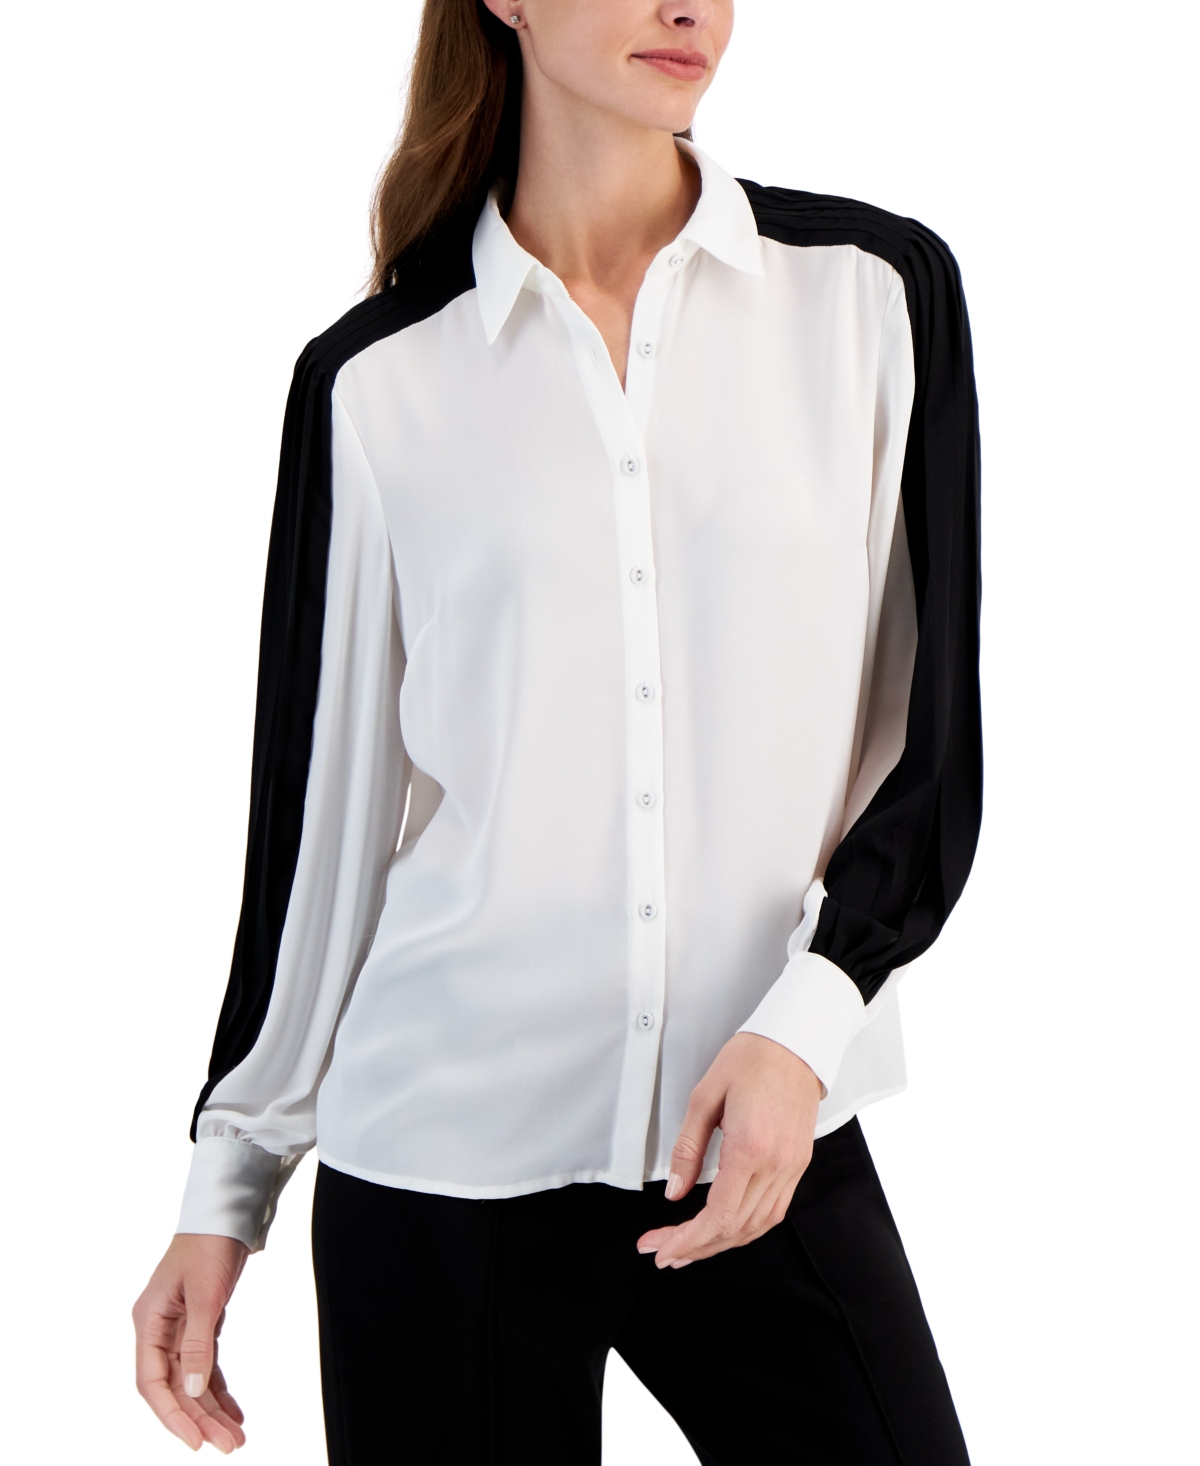 Women's Colorblocked Pleated-Sleeve Button Front Top - White  Black